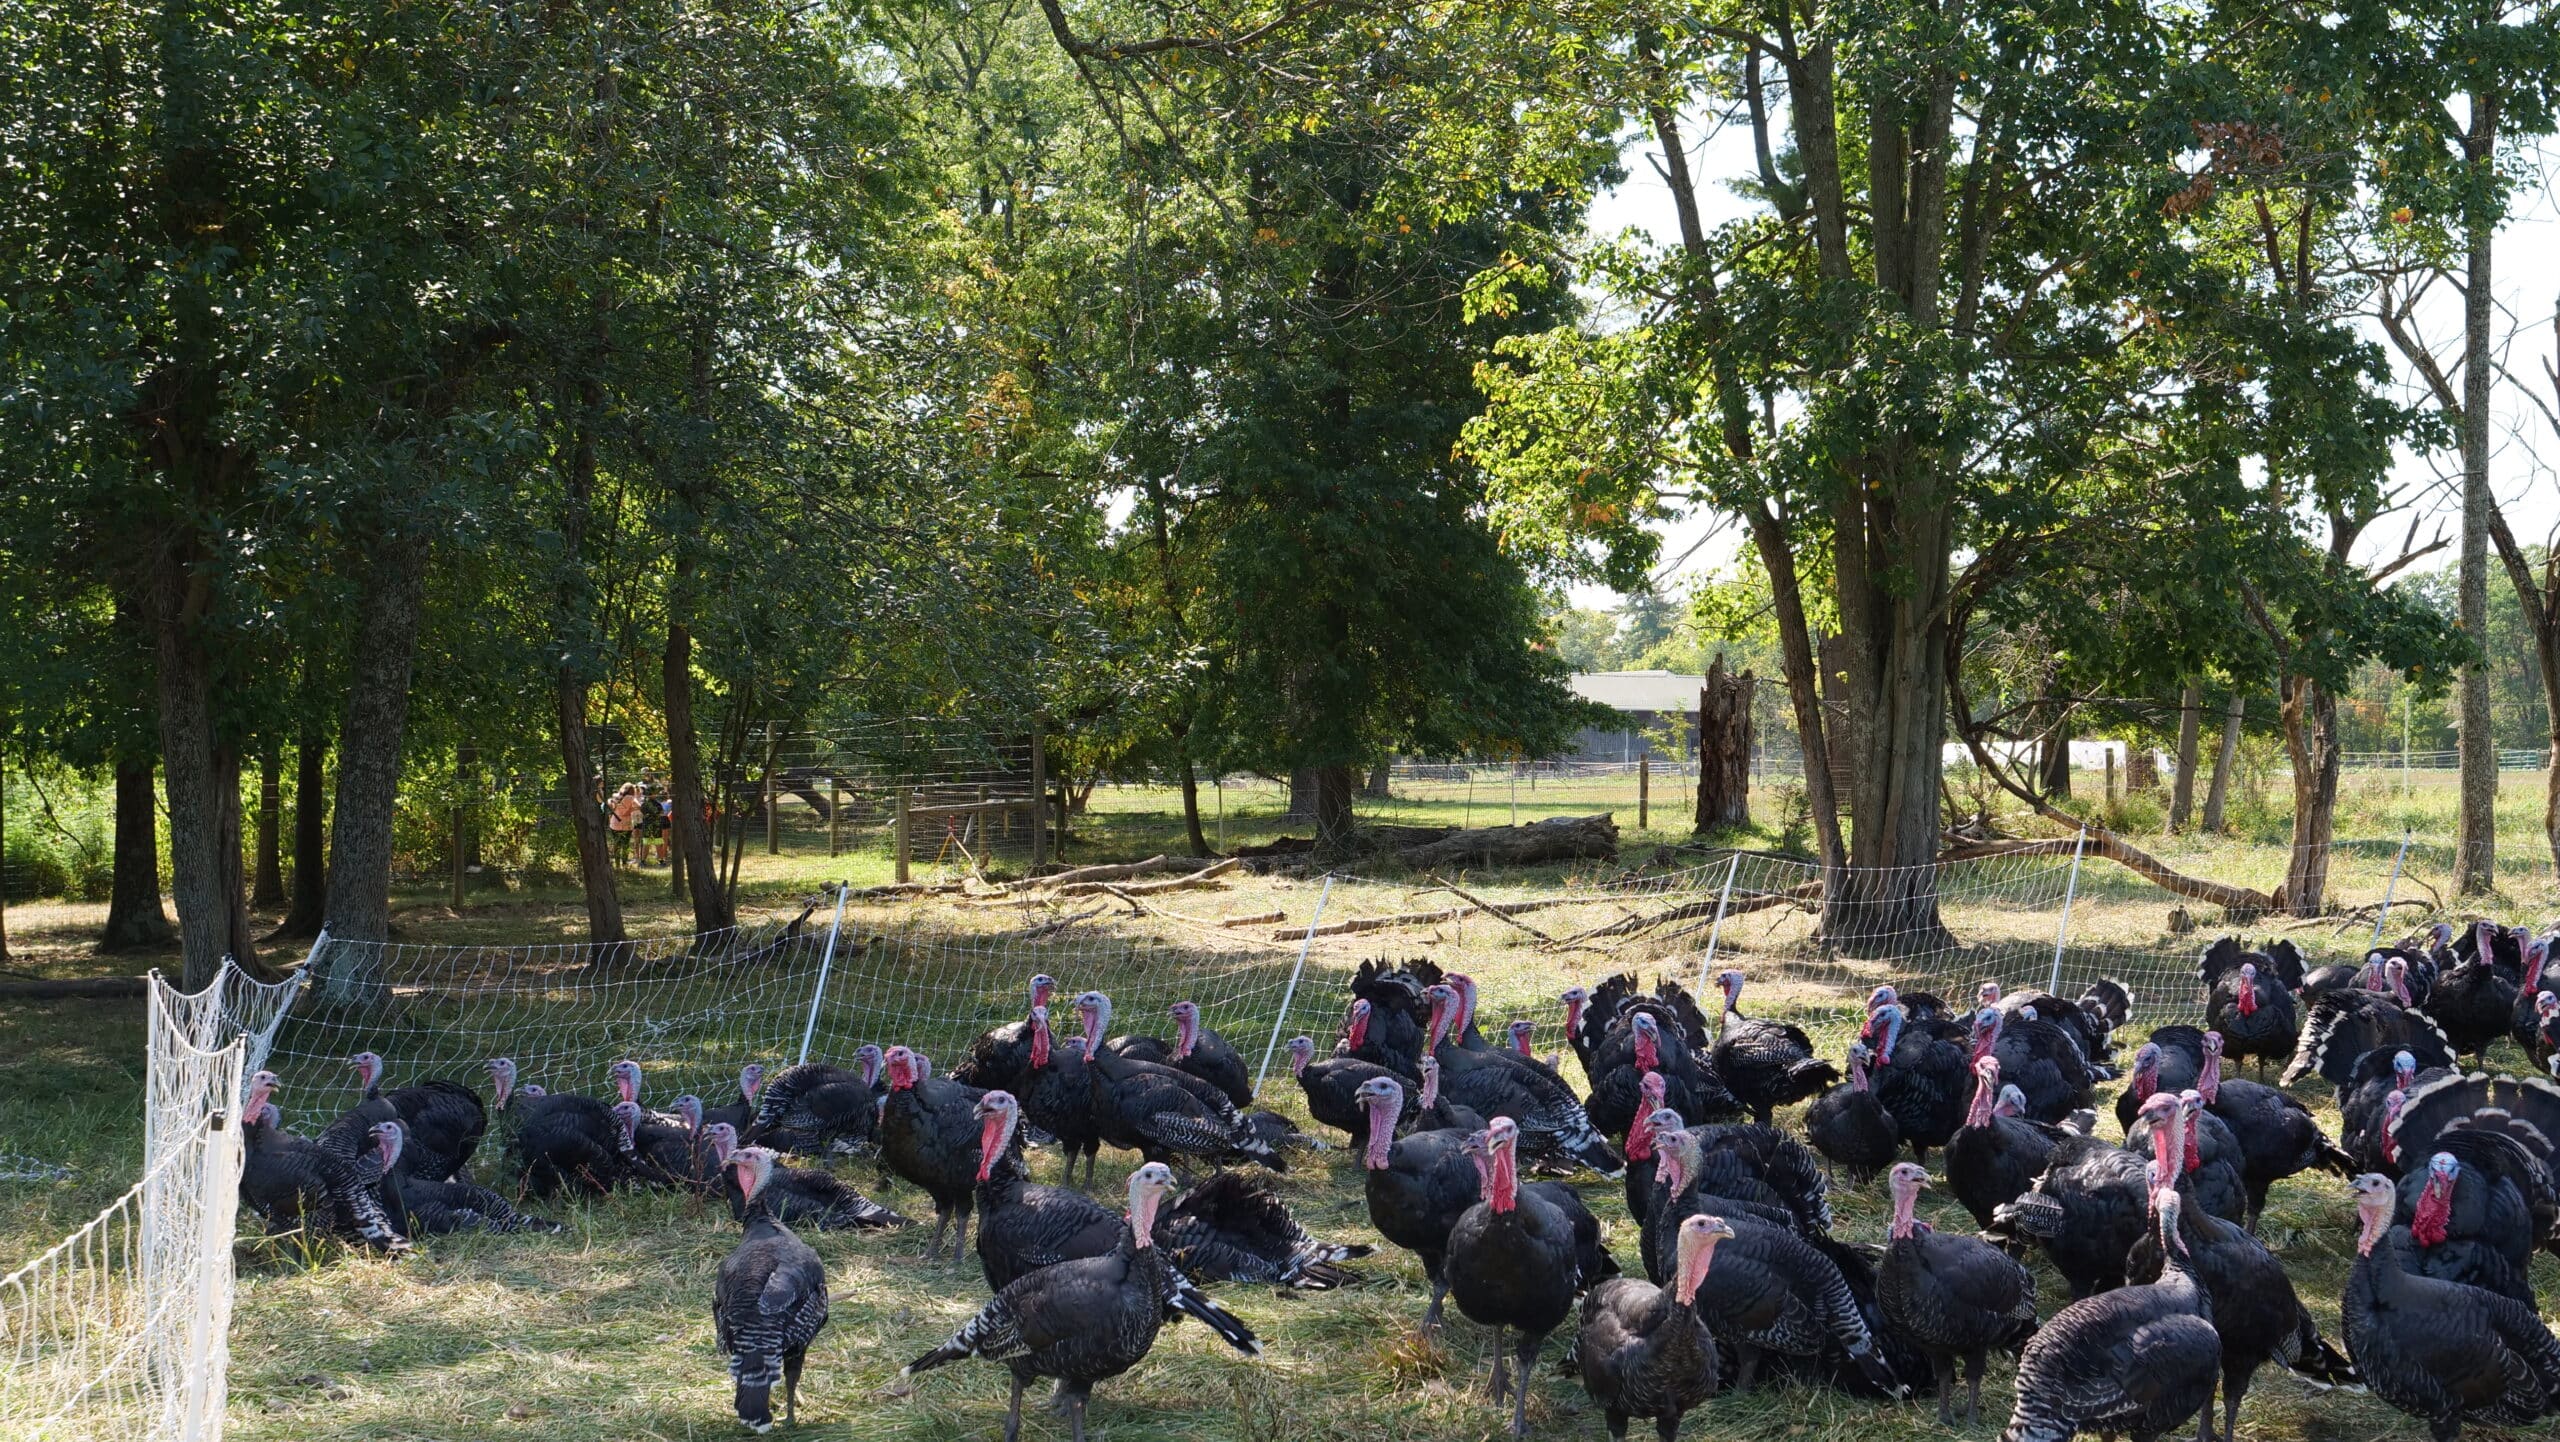 Broad-breasted bronze turkeys on pasture, surrounded by tall trees and with field trip class in the background